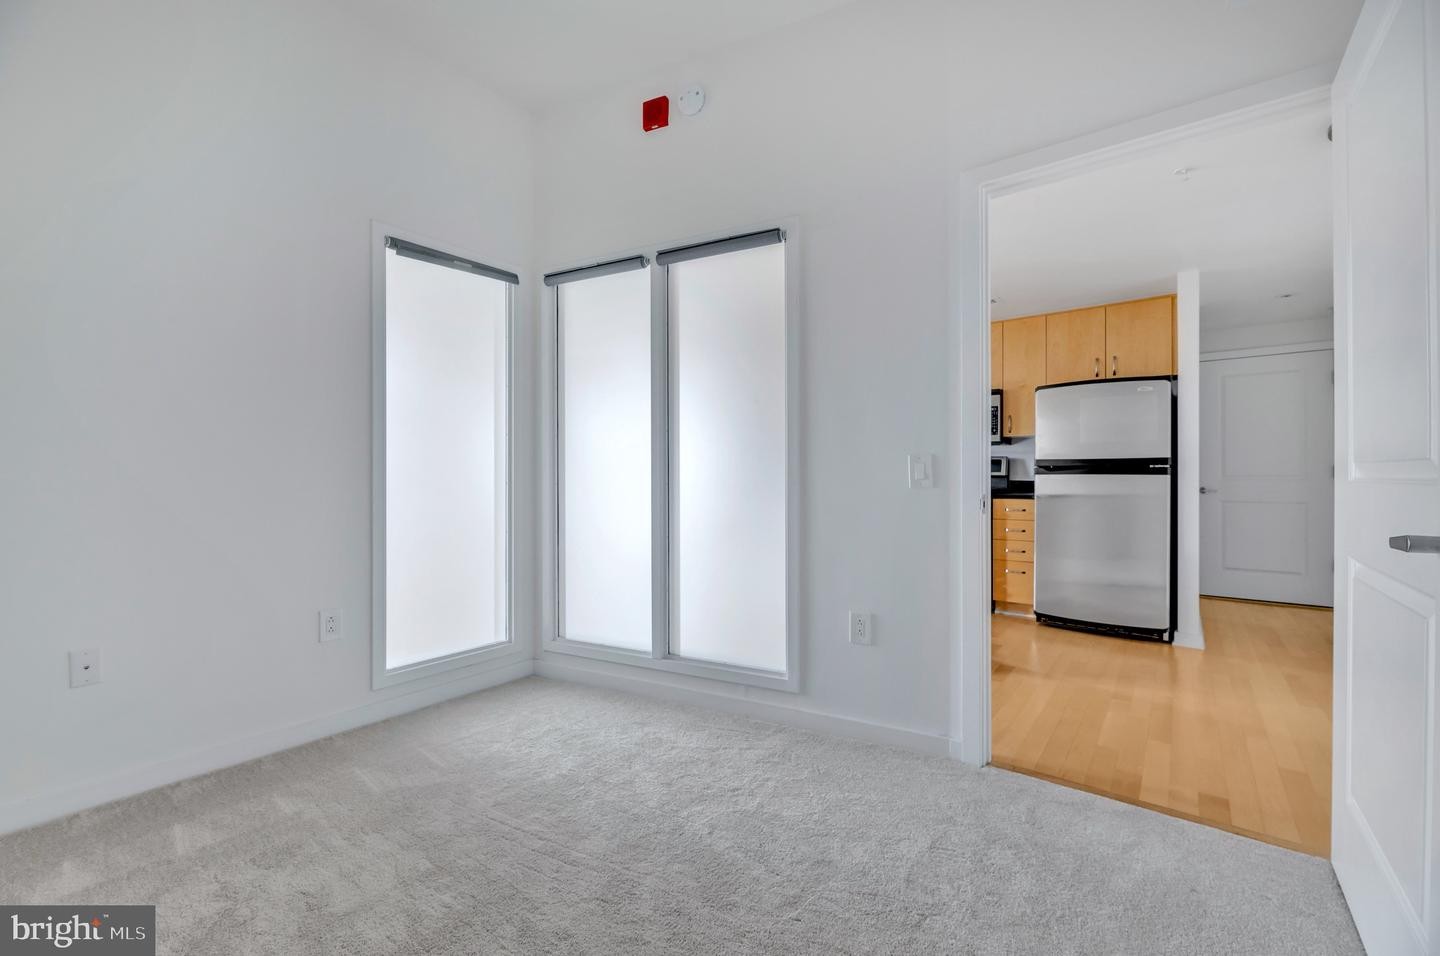 13. 475 K St NW 